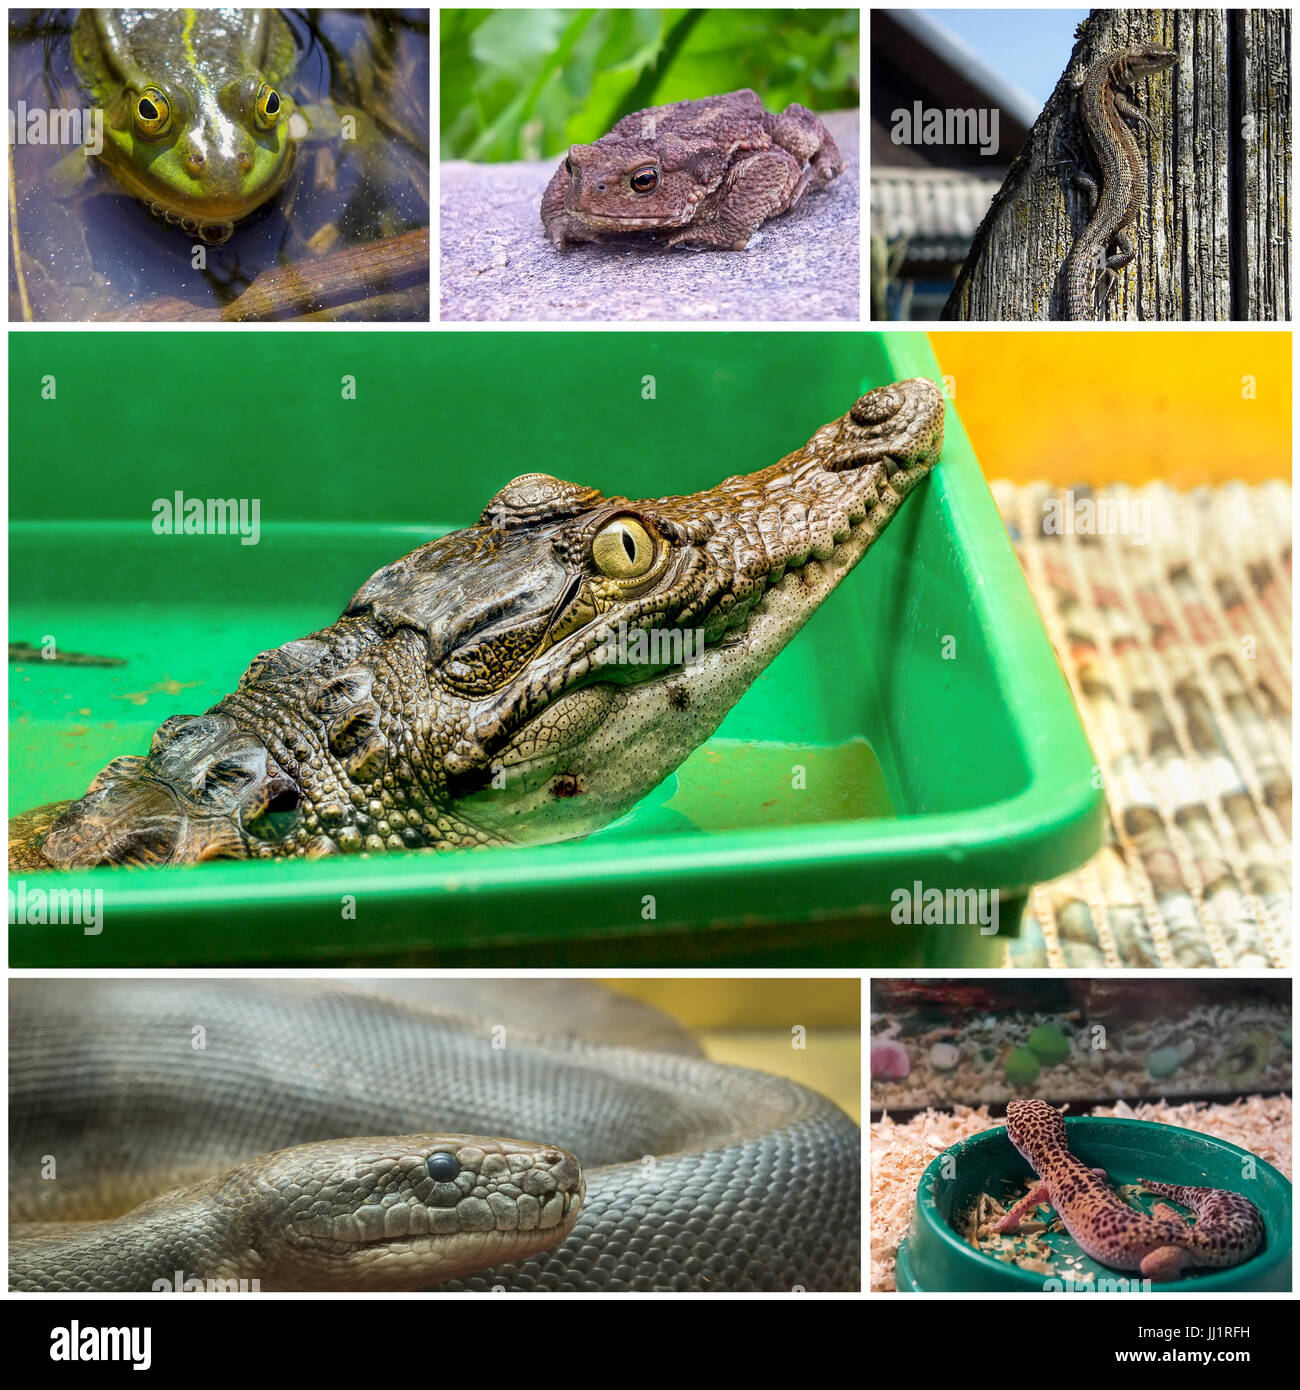 Collage with reptiles and amphibians Stock Photo